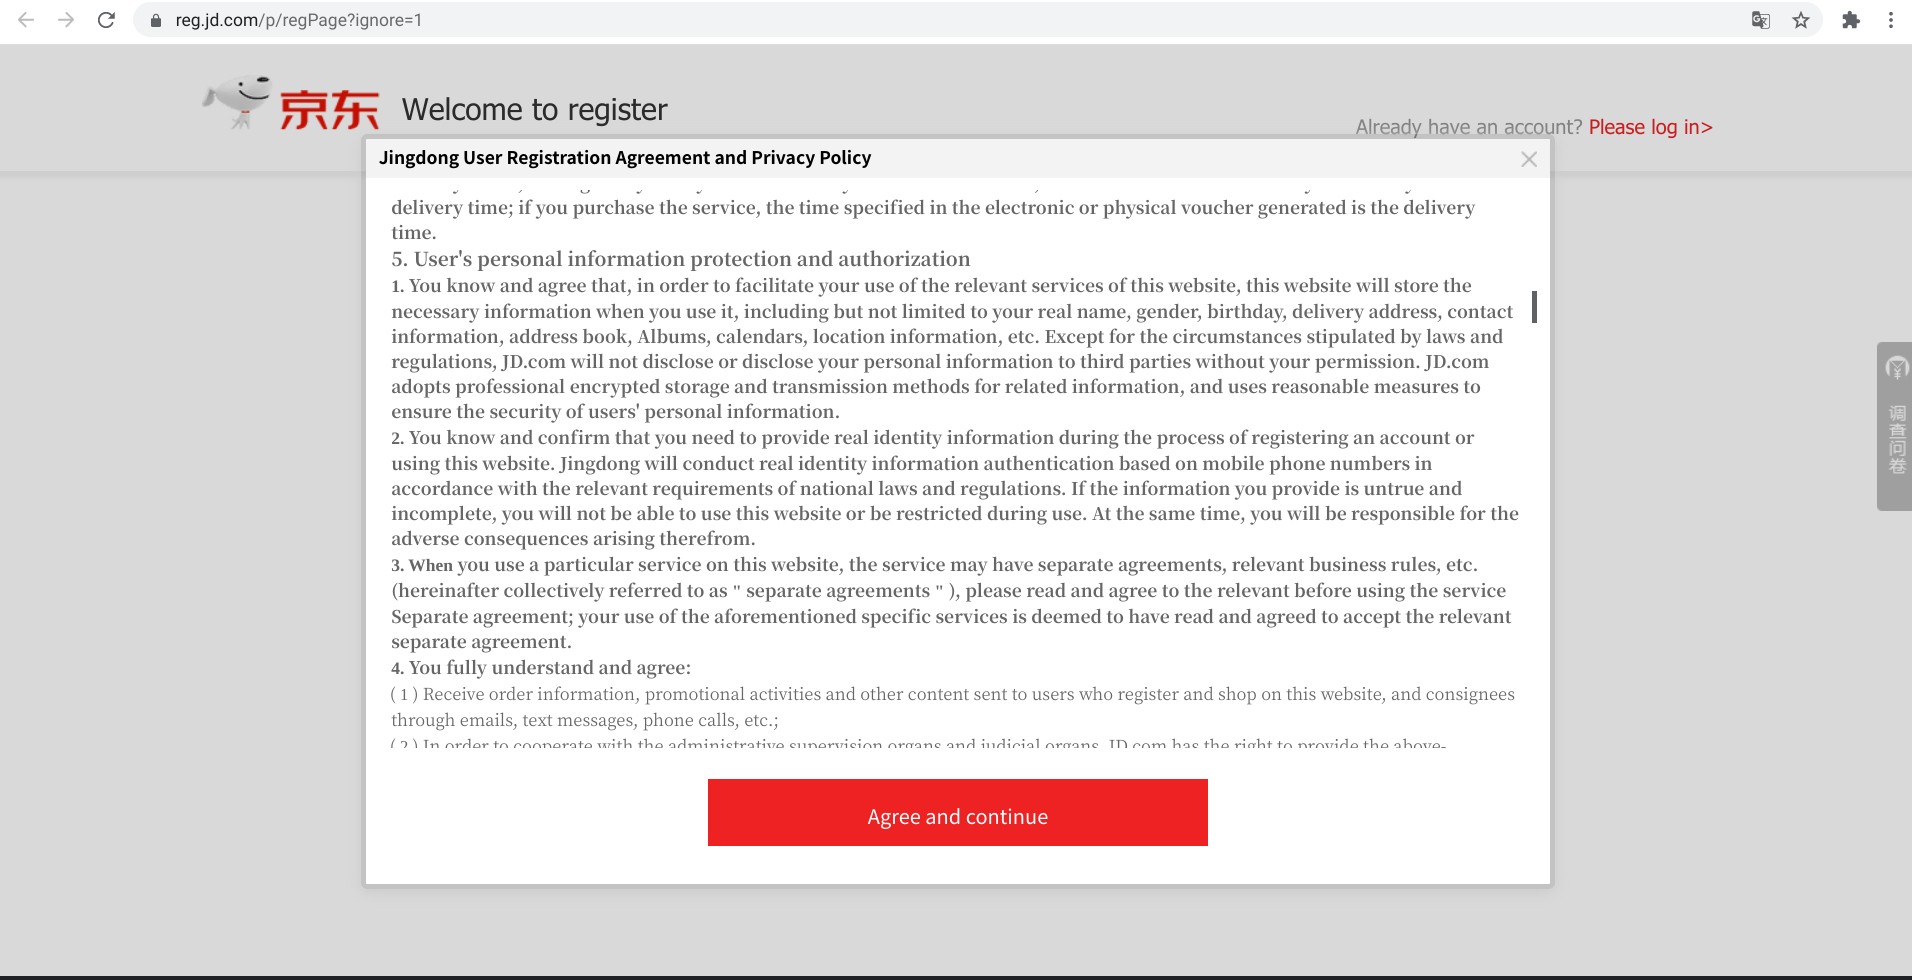 Screenshot of the English translation of the user registration agreement and privacy policy of Jingdong.com